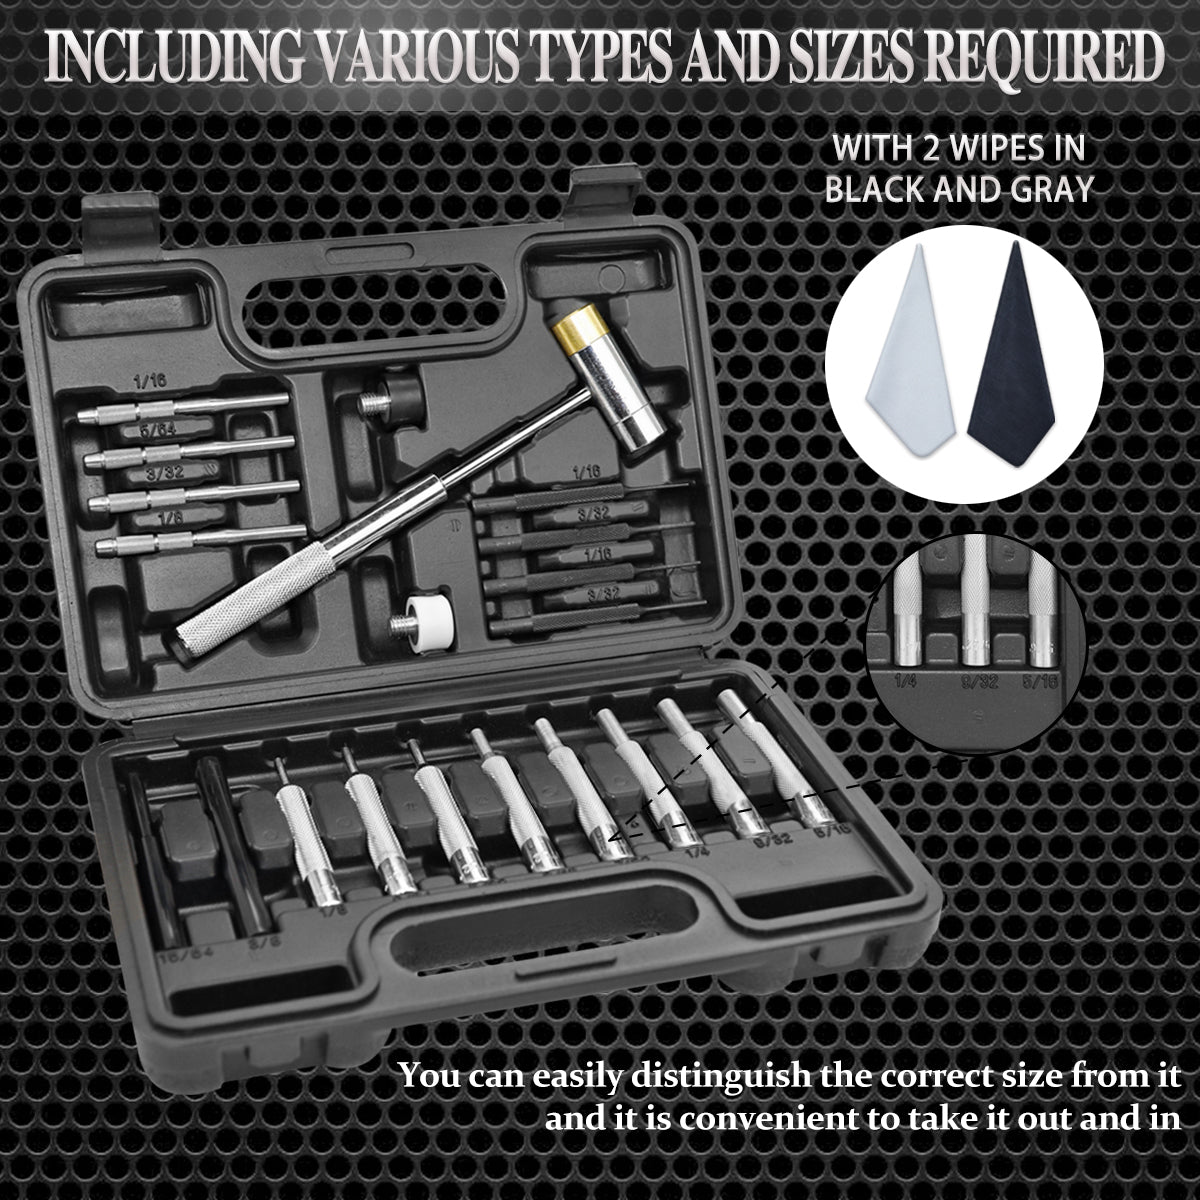 BESTNULE Gunsnithing Punch Set, Pin Punches, Punch Tool, Roll Pin Punch Set, Made of High Quality Metal Material Including Punches and Hammer, Mechanical Repair Tool, with Organizer Storage Box (with Bench Block)